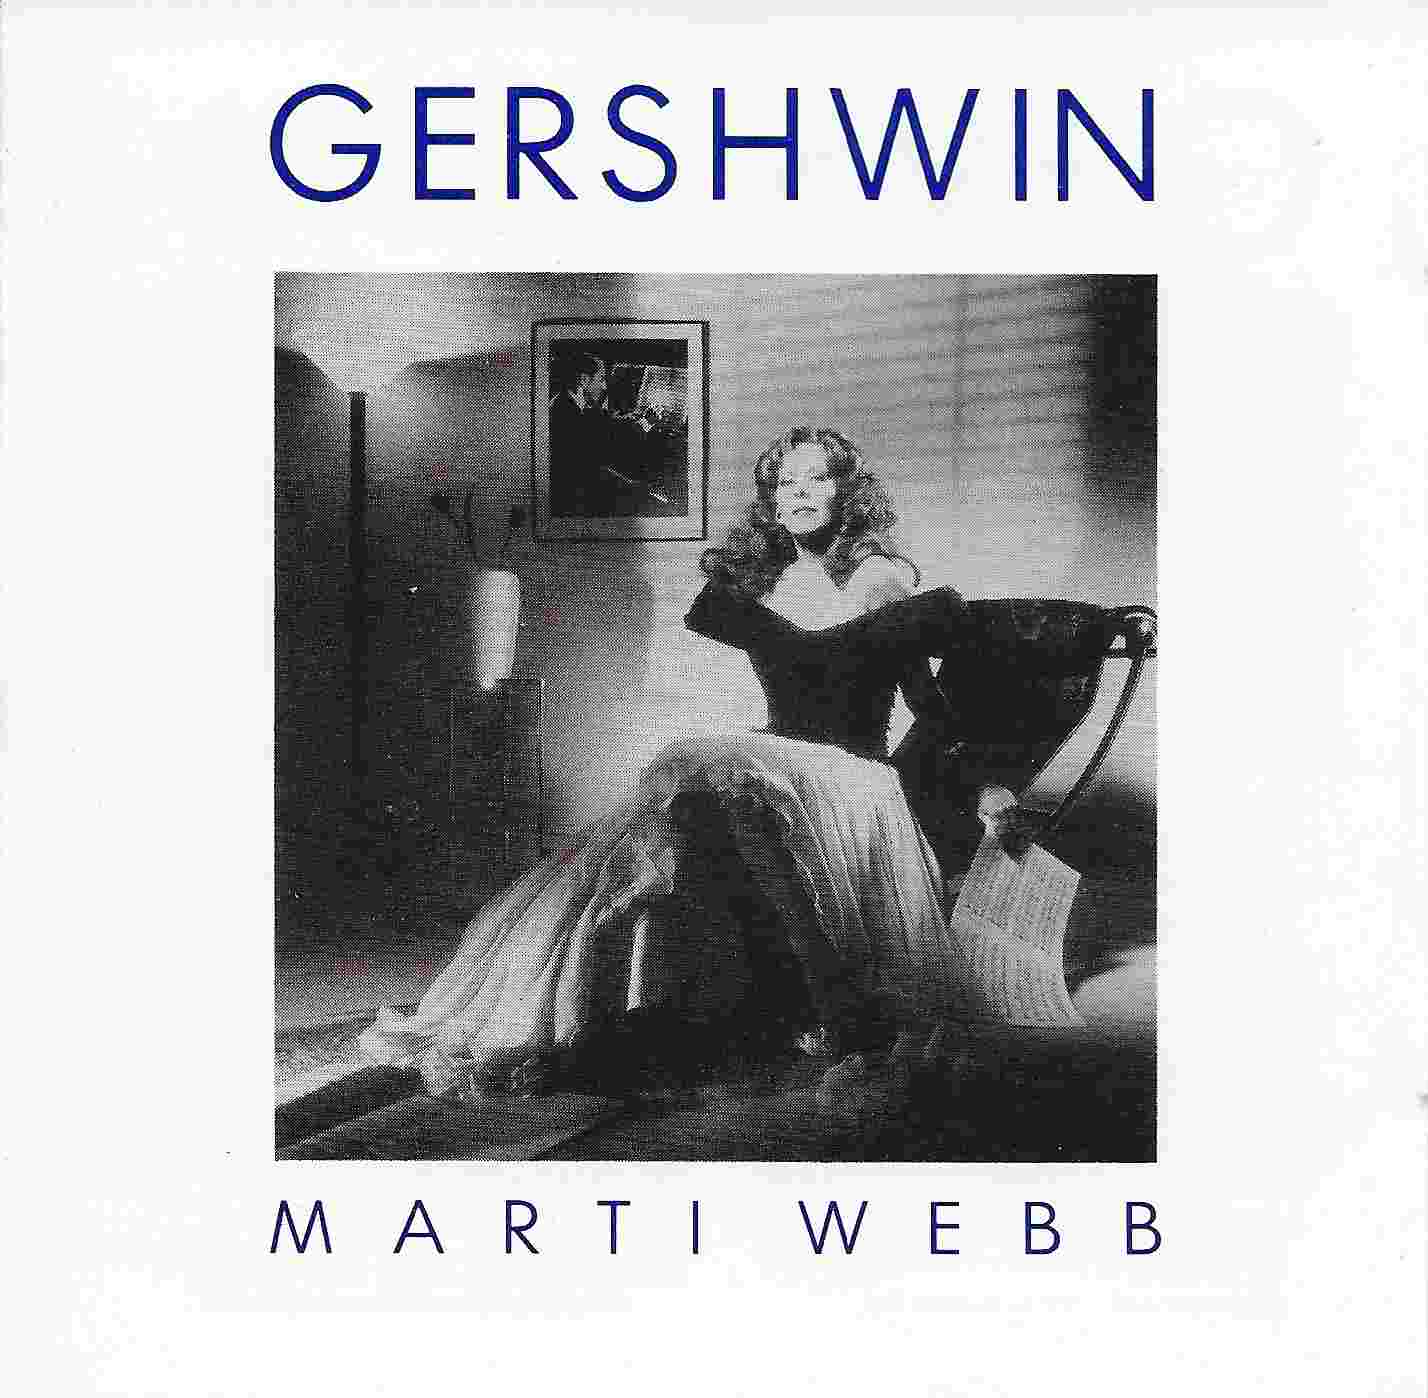 Picture of Gershwin by artist Marti Webb from the BBC cds - Records and Tapes library